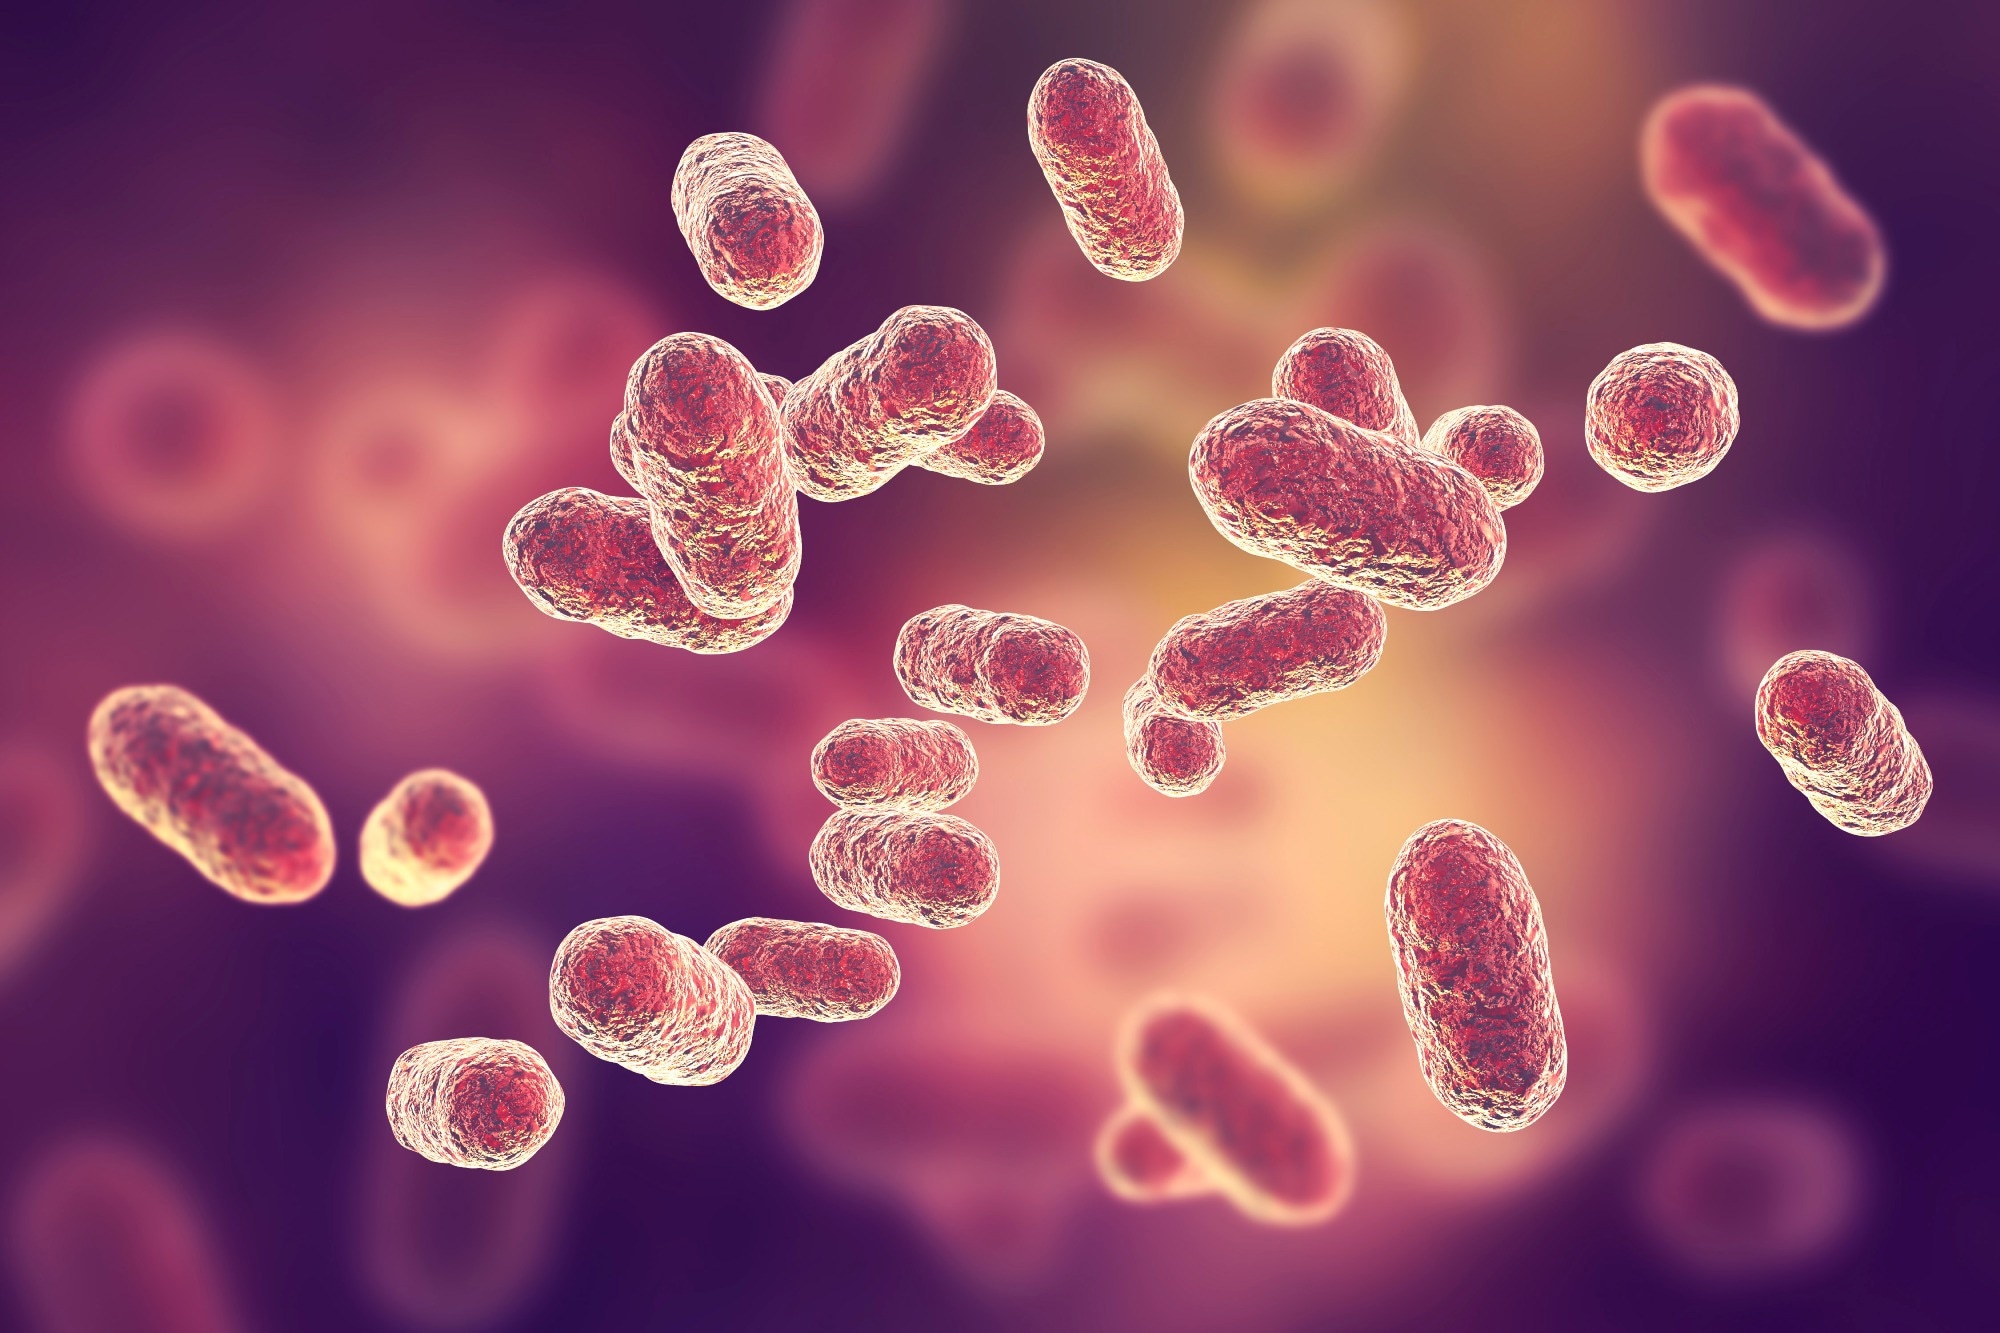 Study: Impact of (recurrent) bacterial vaginosis on quality of life and the need for accessible alternative treatments. Image Credit: Kateryna Kon/Shutterstock